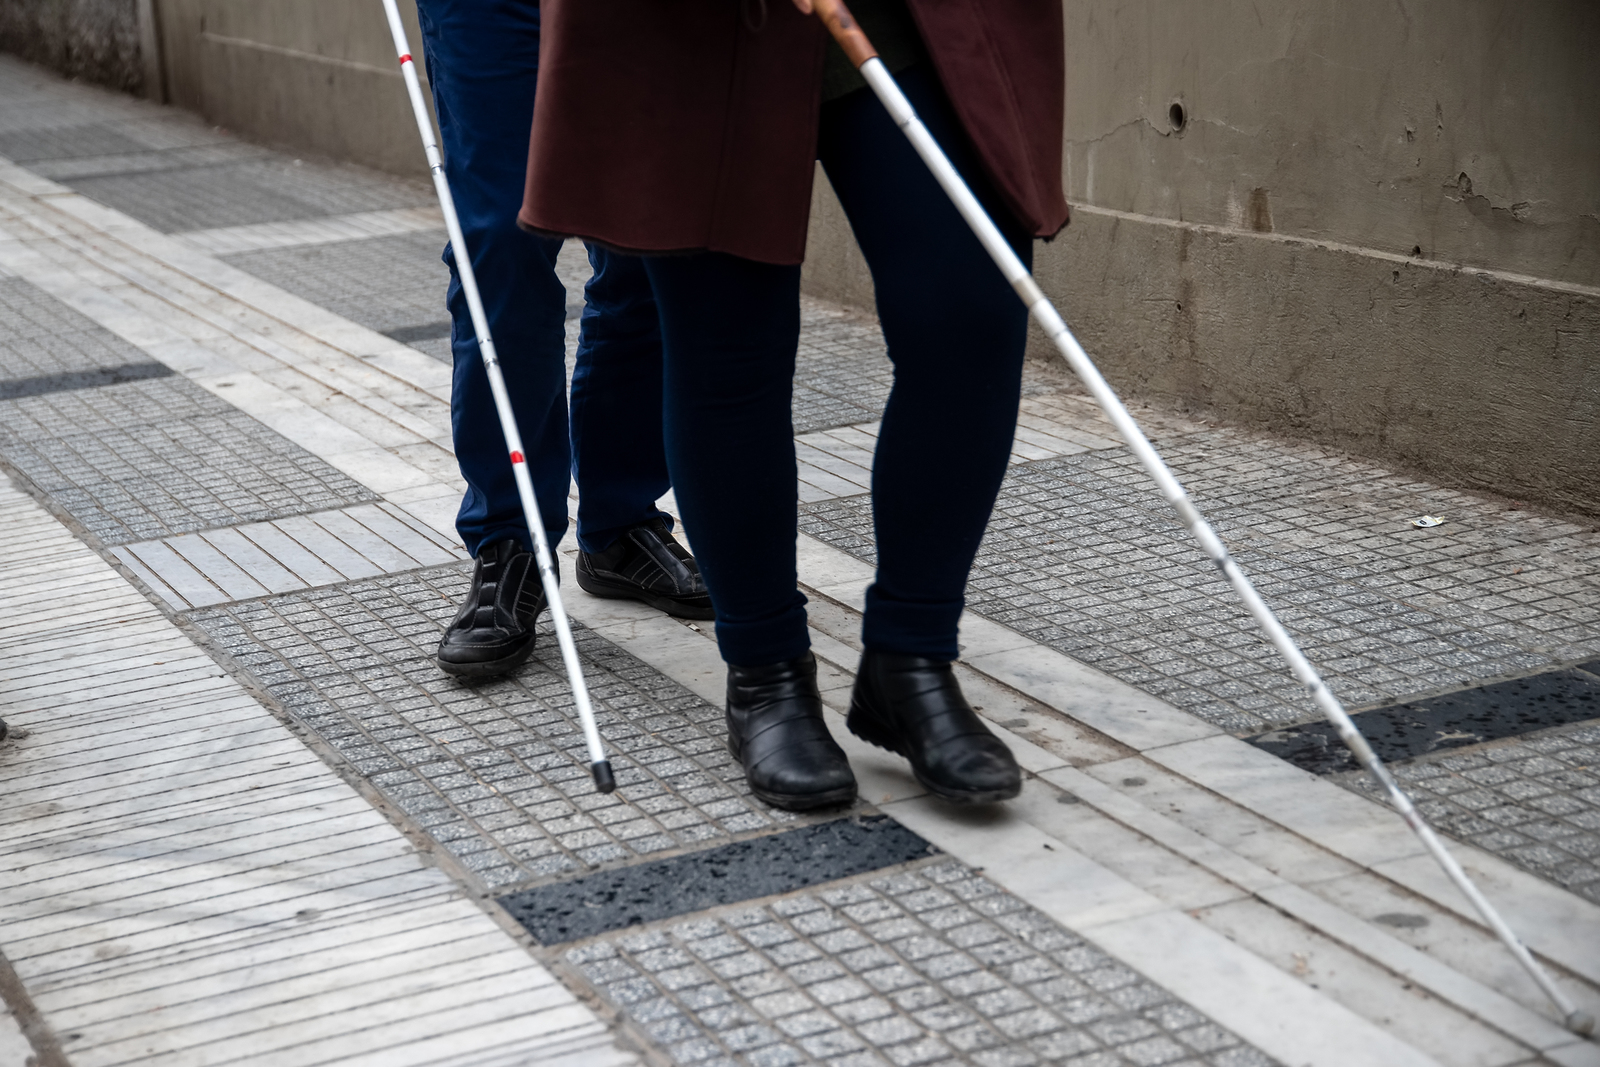 blind man and woman walking on the street using white canes.